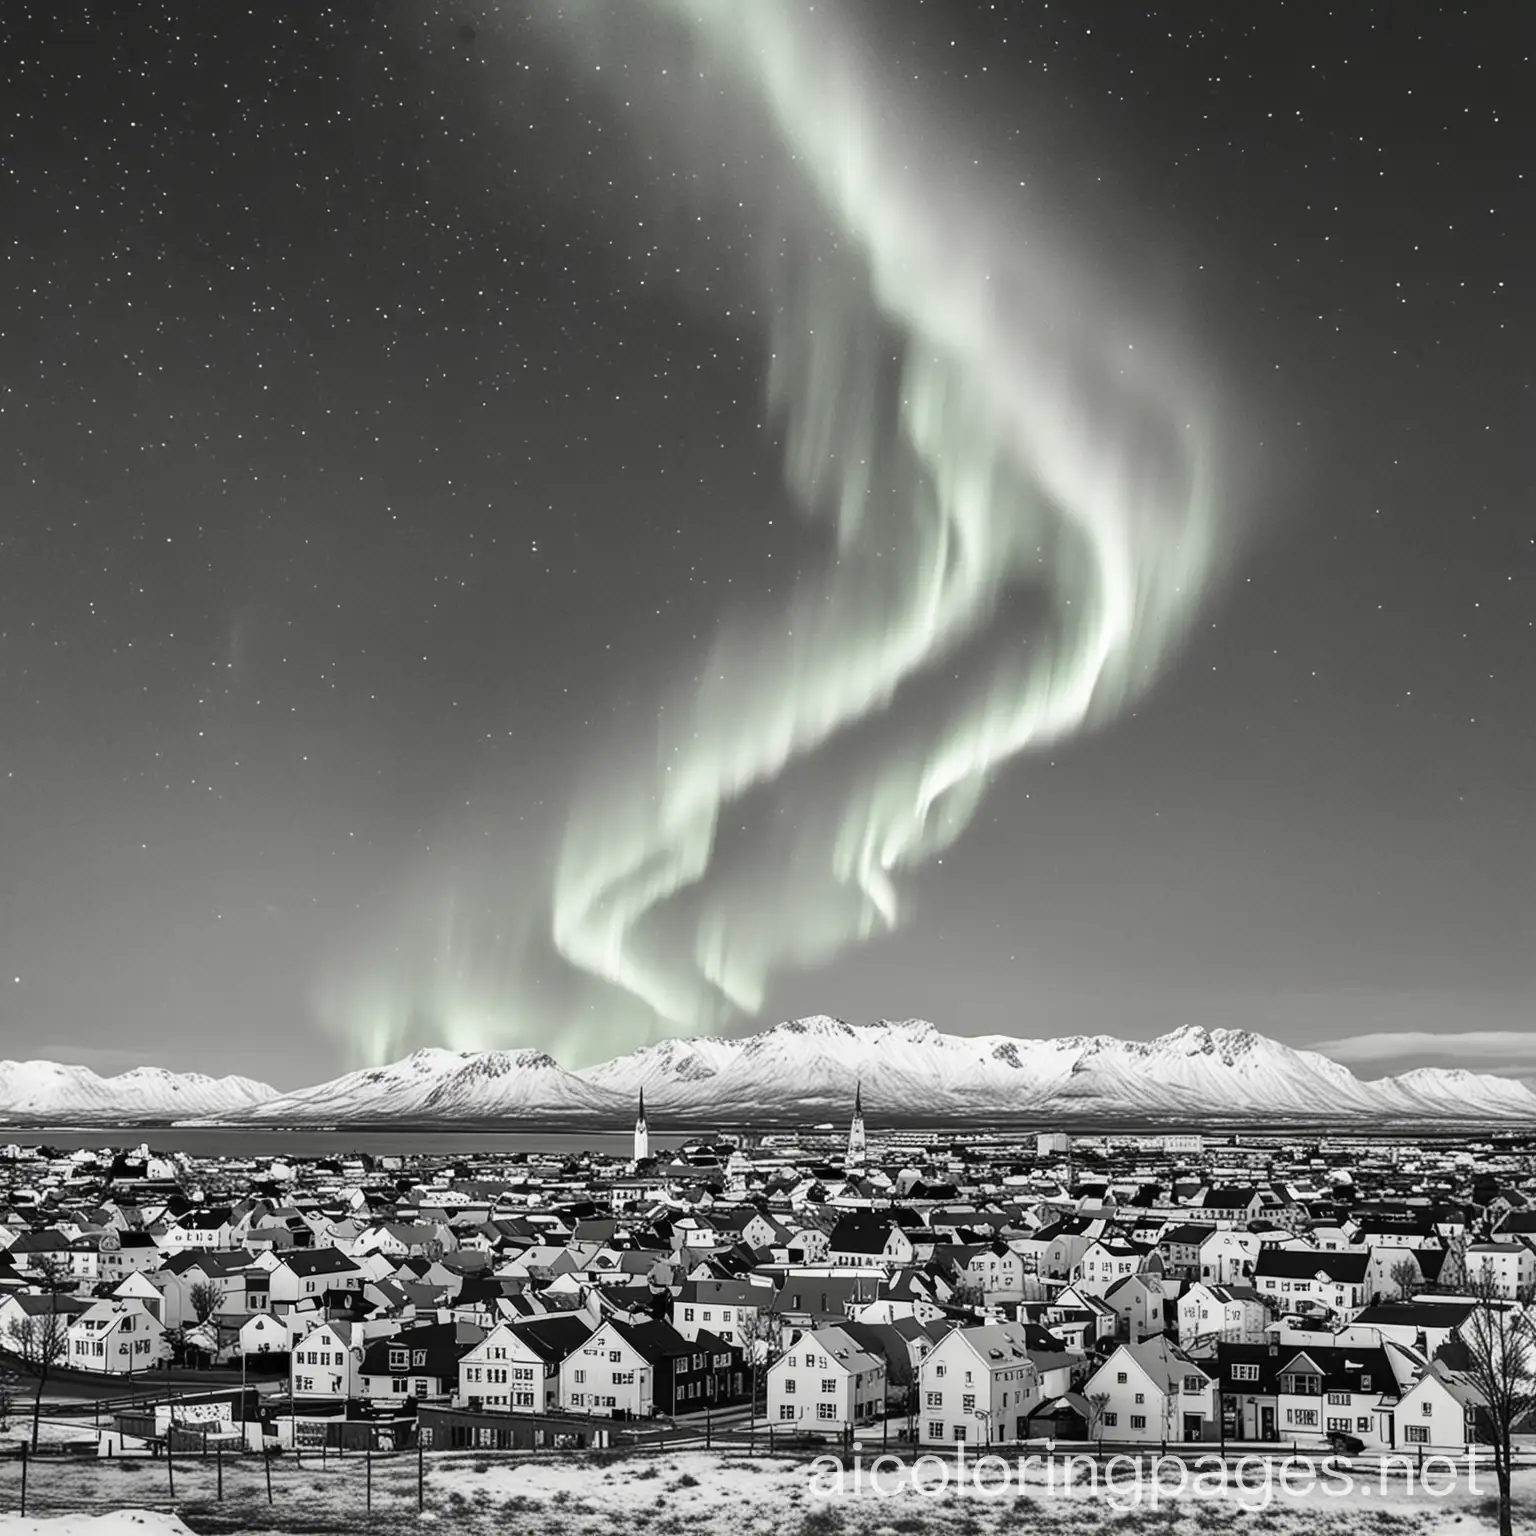 Northern Lights Reykjarvik Iceland Grey and White, Coloring Page, black and white, line art, white background, Simplicity, Ample White Space. The background of the coloring page is plain white to make it easy for young children to color within the lines. The outlines of all the subjects are easy to distinguish, making it simple for kids to color without too much difficulty